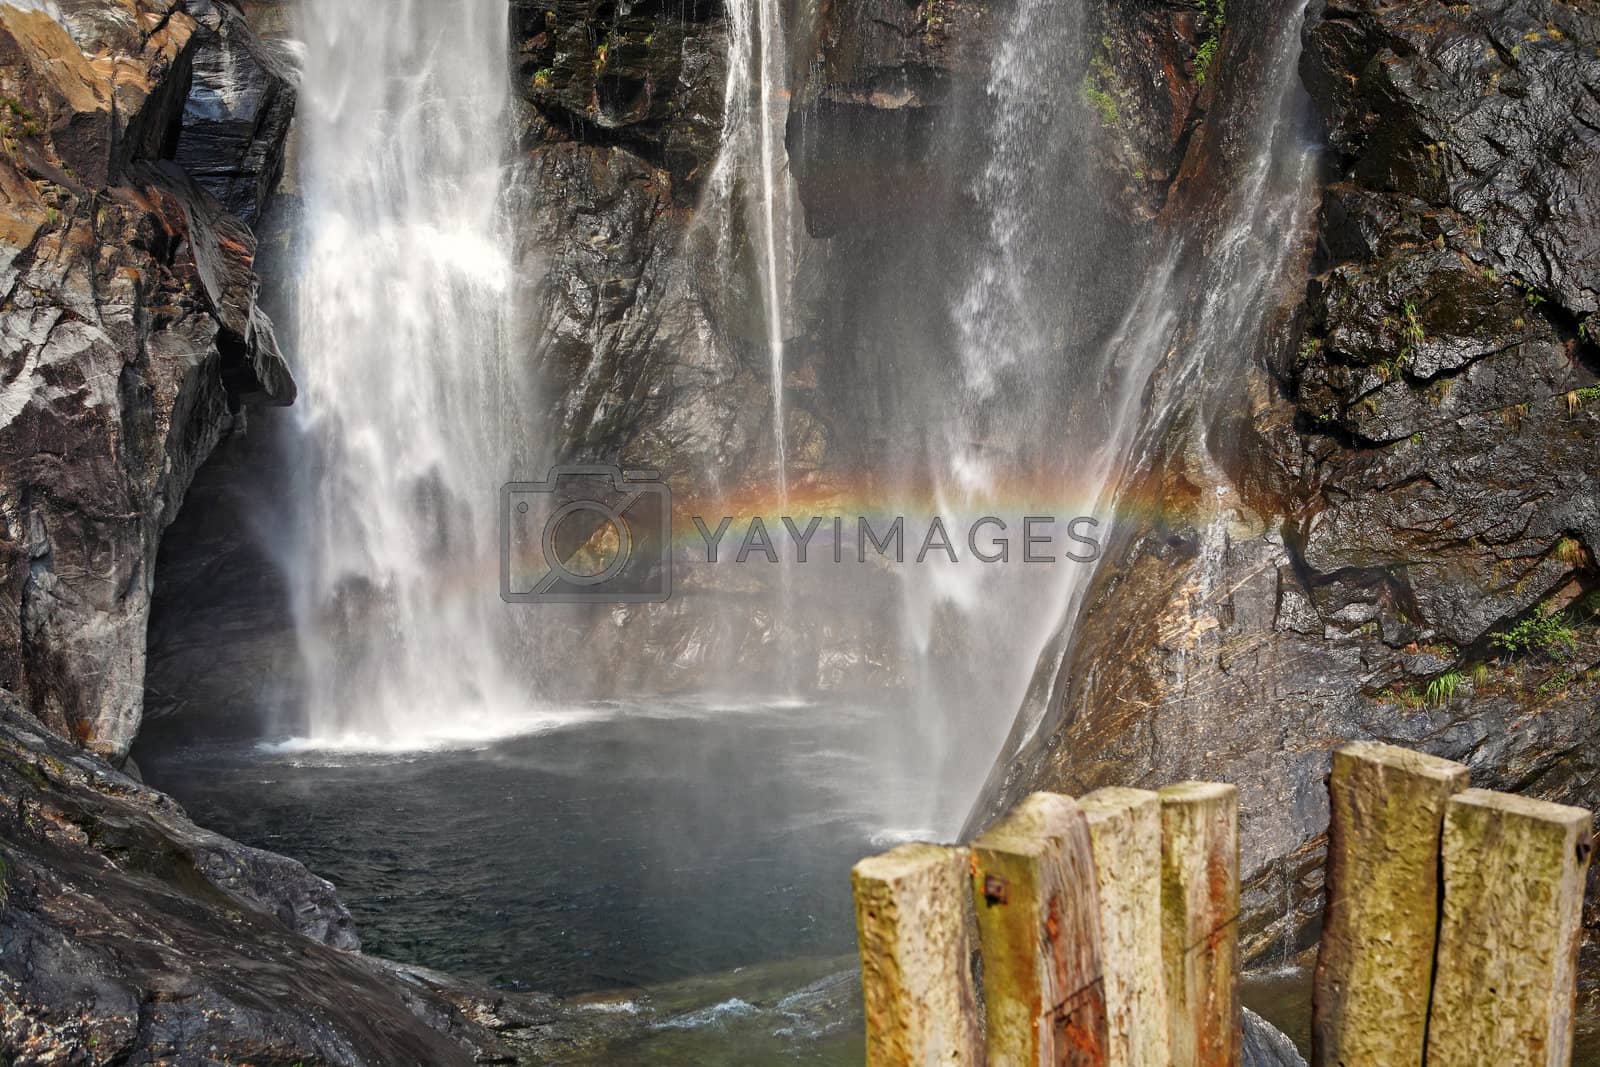 Royalty free image of Waterfall by pozitivstudija